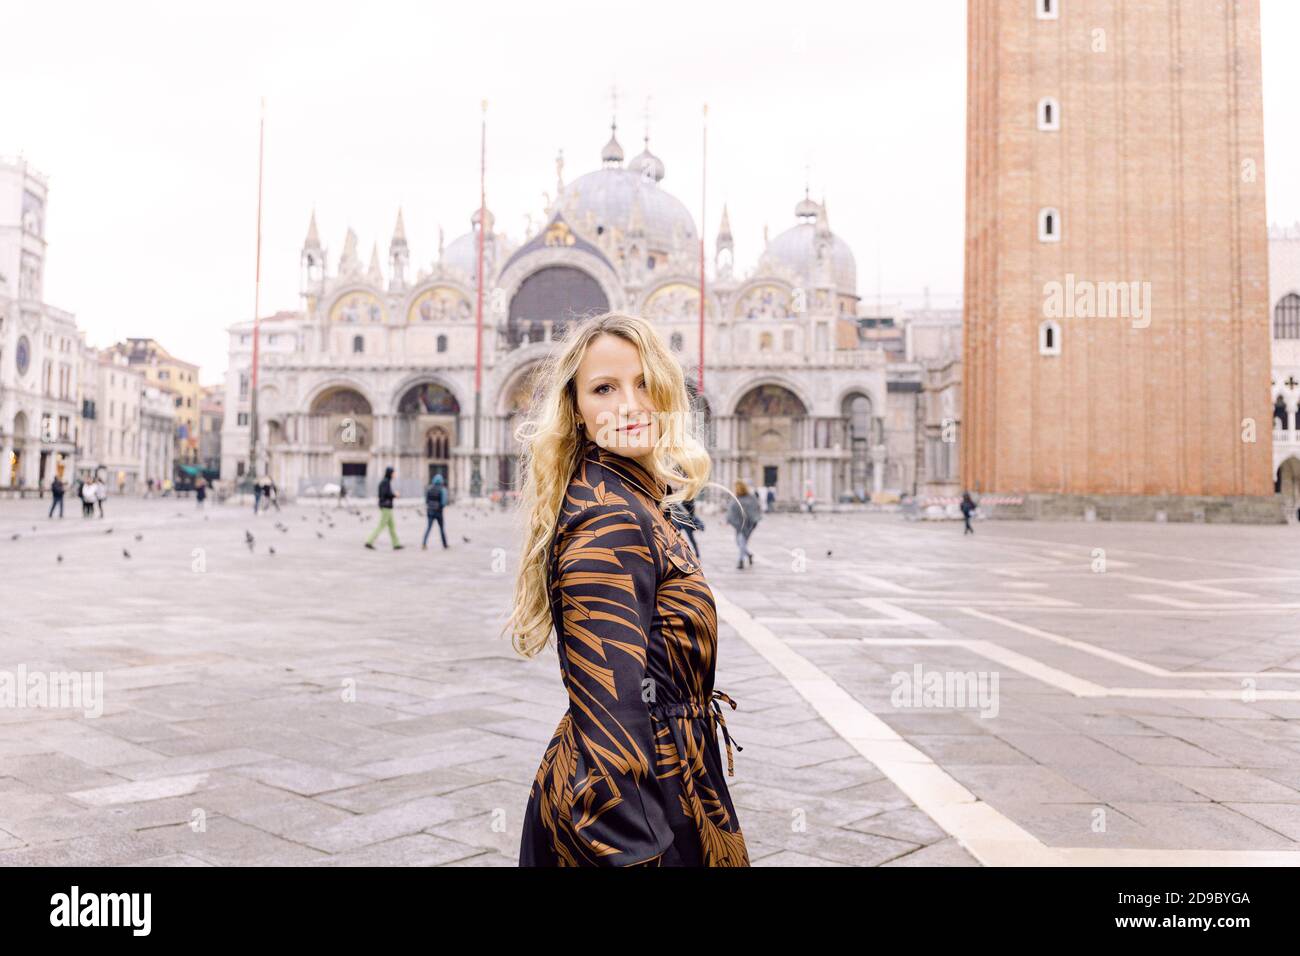 Blonde woman looking at the camera, in a long dark dress walking in Piazza San Marco, Venice, Italy Stock Photo